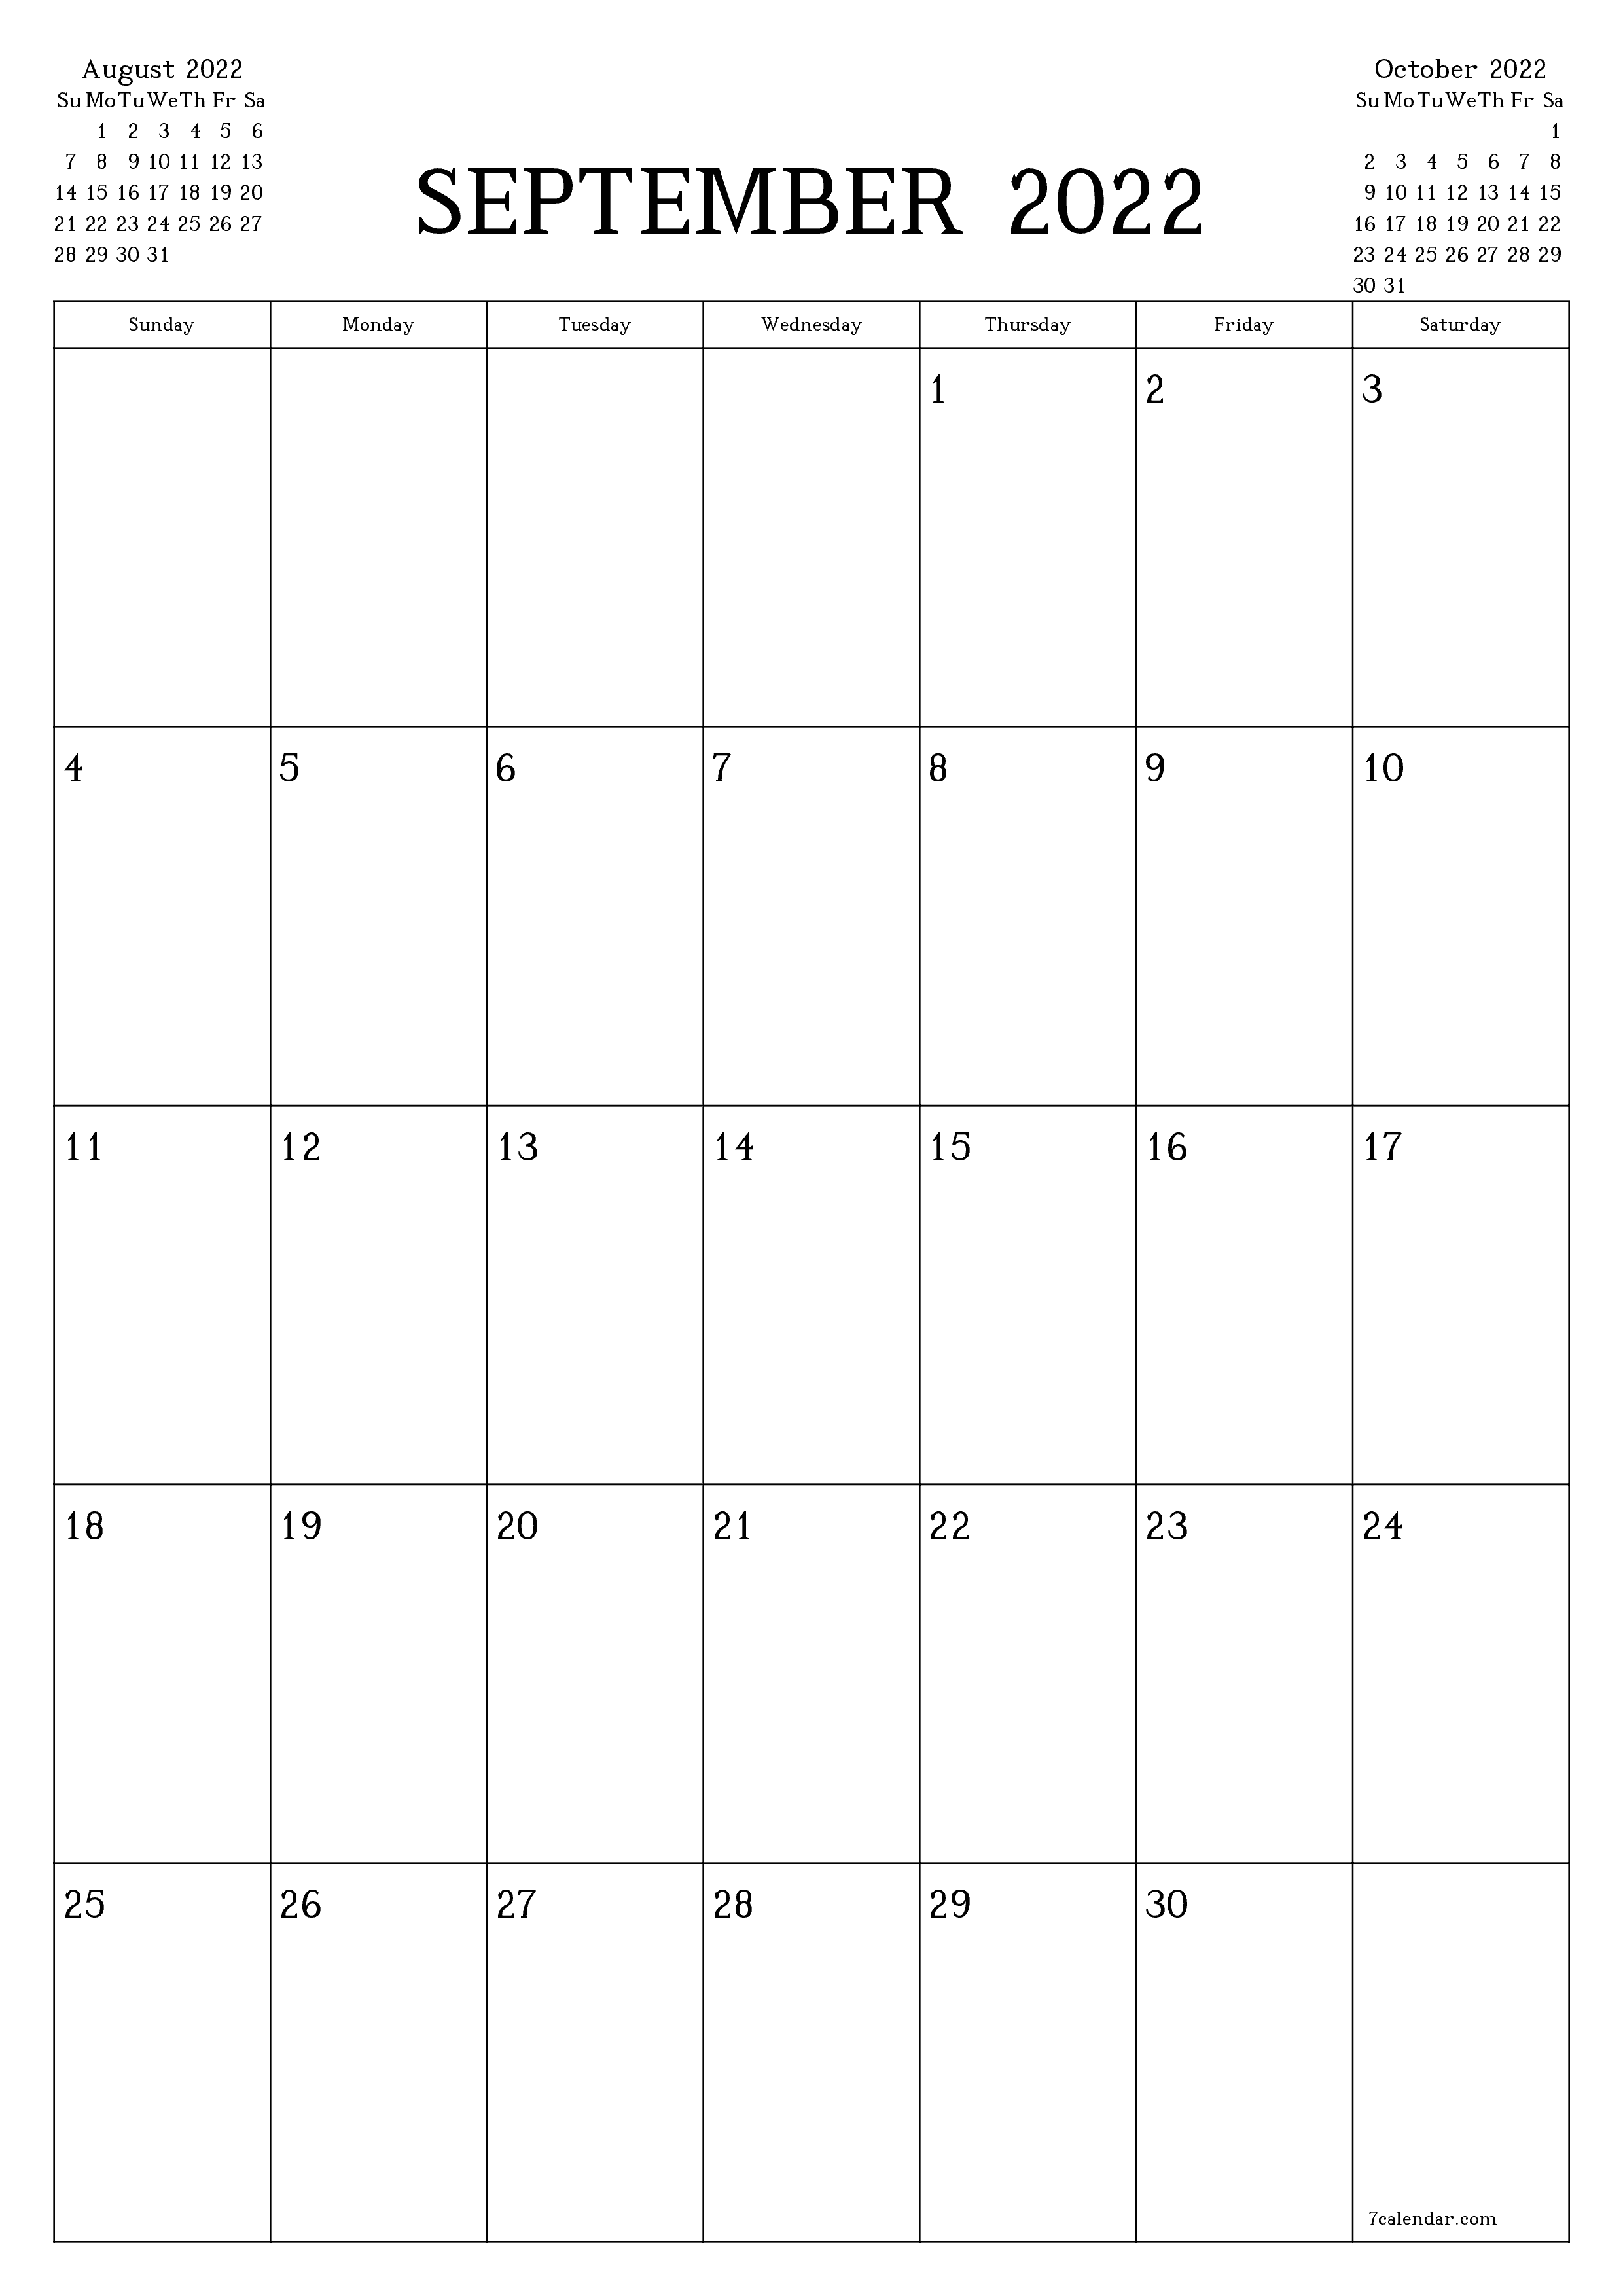 Blank monthly printable calendar and planner for month September 2022 with notes save and print to PDF PNG English - 7calendar.com